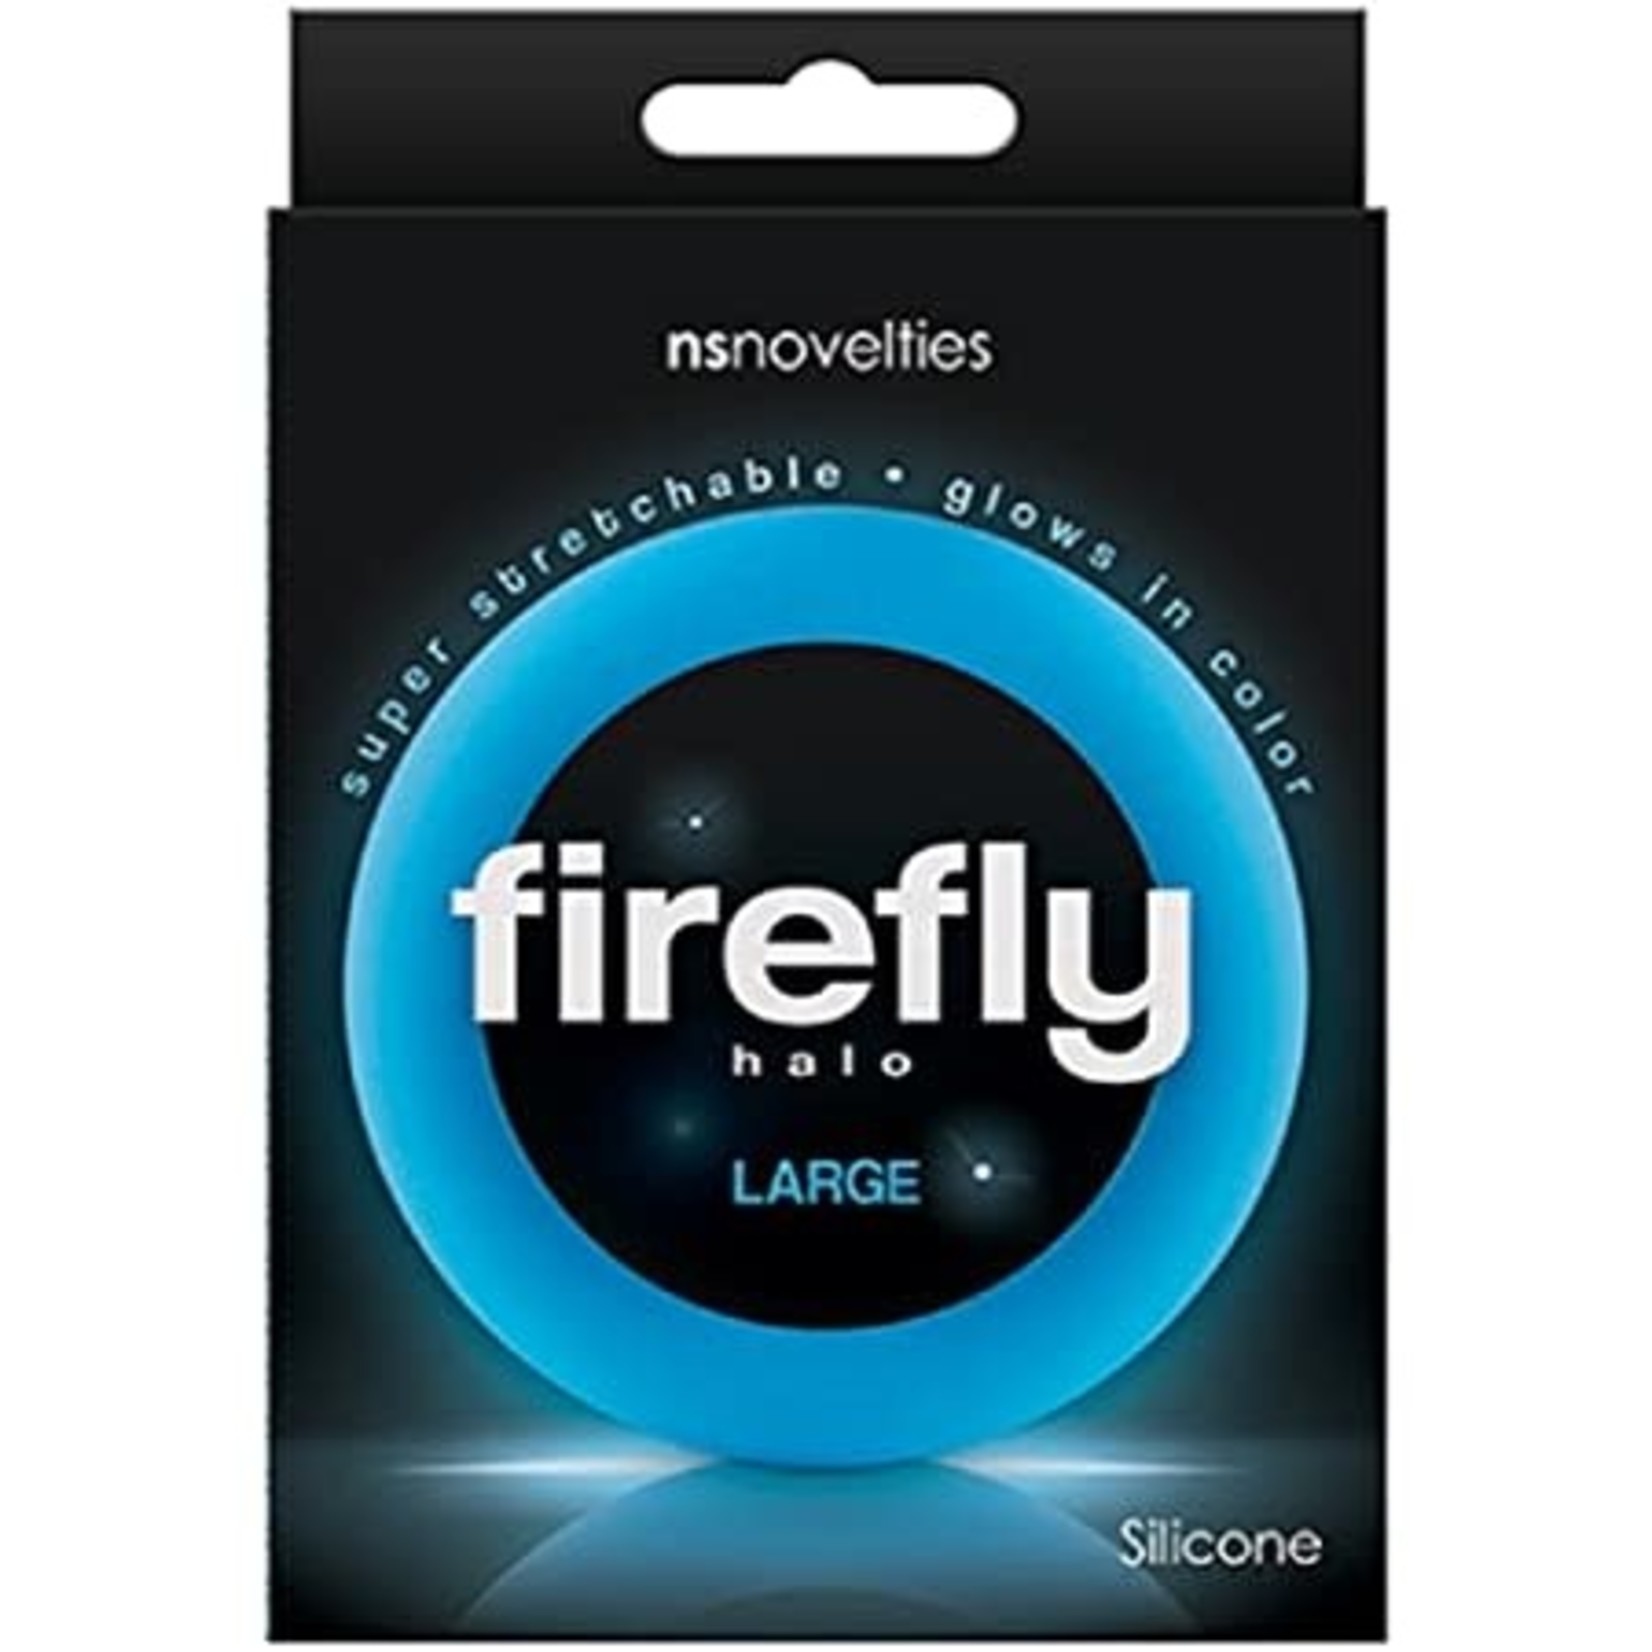 NS novelties Halo - Fire Fly Silicone Cockring - Glows in the Dark!